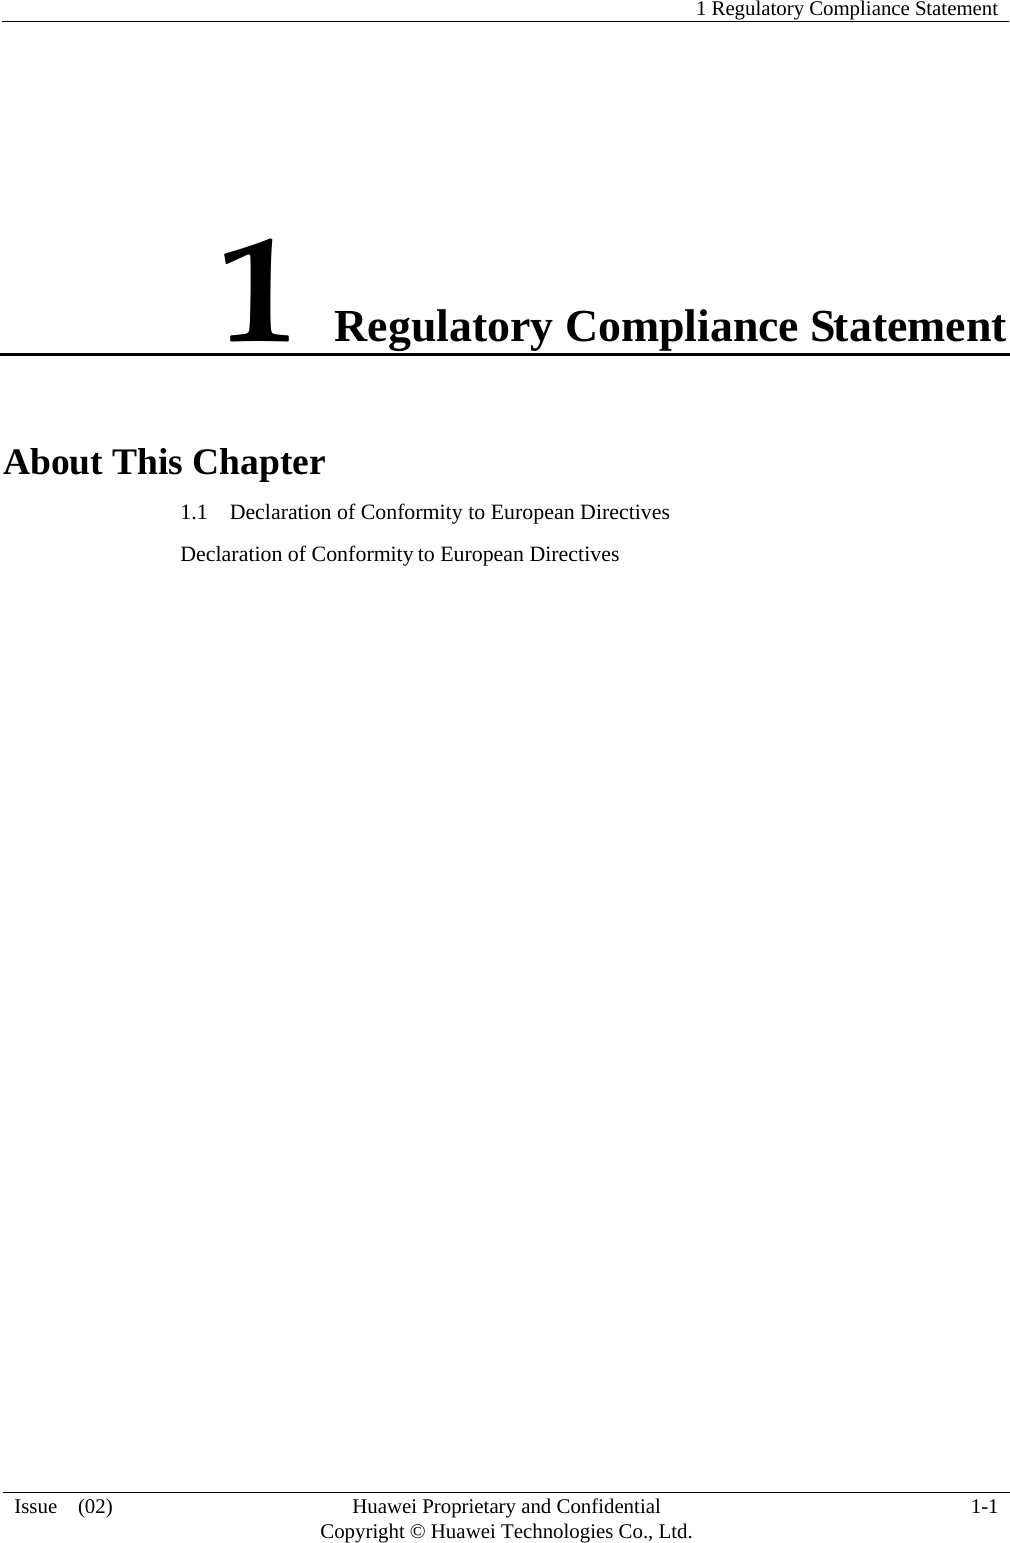   1 Regulatory Compliance Statement   Issue  (02)  Huawei Proprietary and Confidential     Copyright © Huawei Technologies Co., Ltd.  1-1  1 Regulatory Compliance Statement About This Chapter 1.1    Declaration of Conformity to European Directives Declaration of Conformity to European Directives 